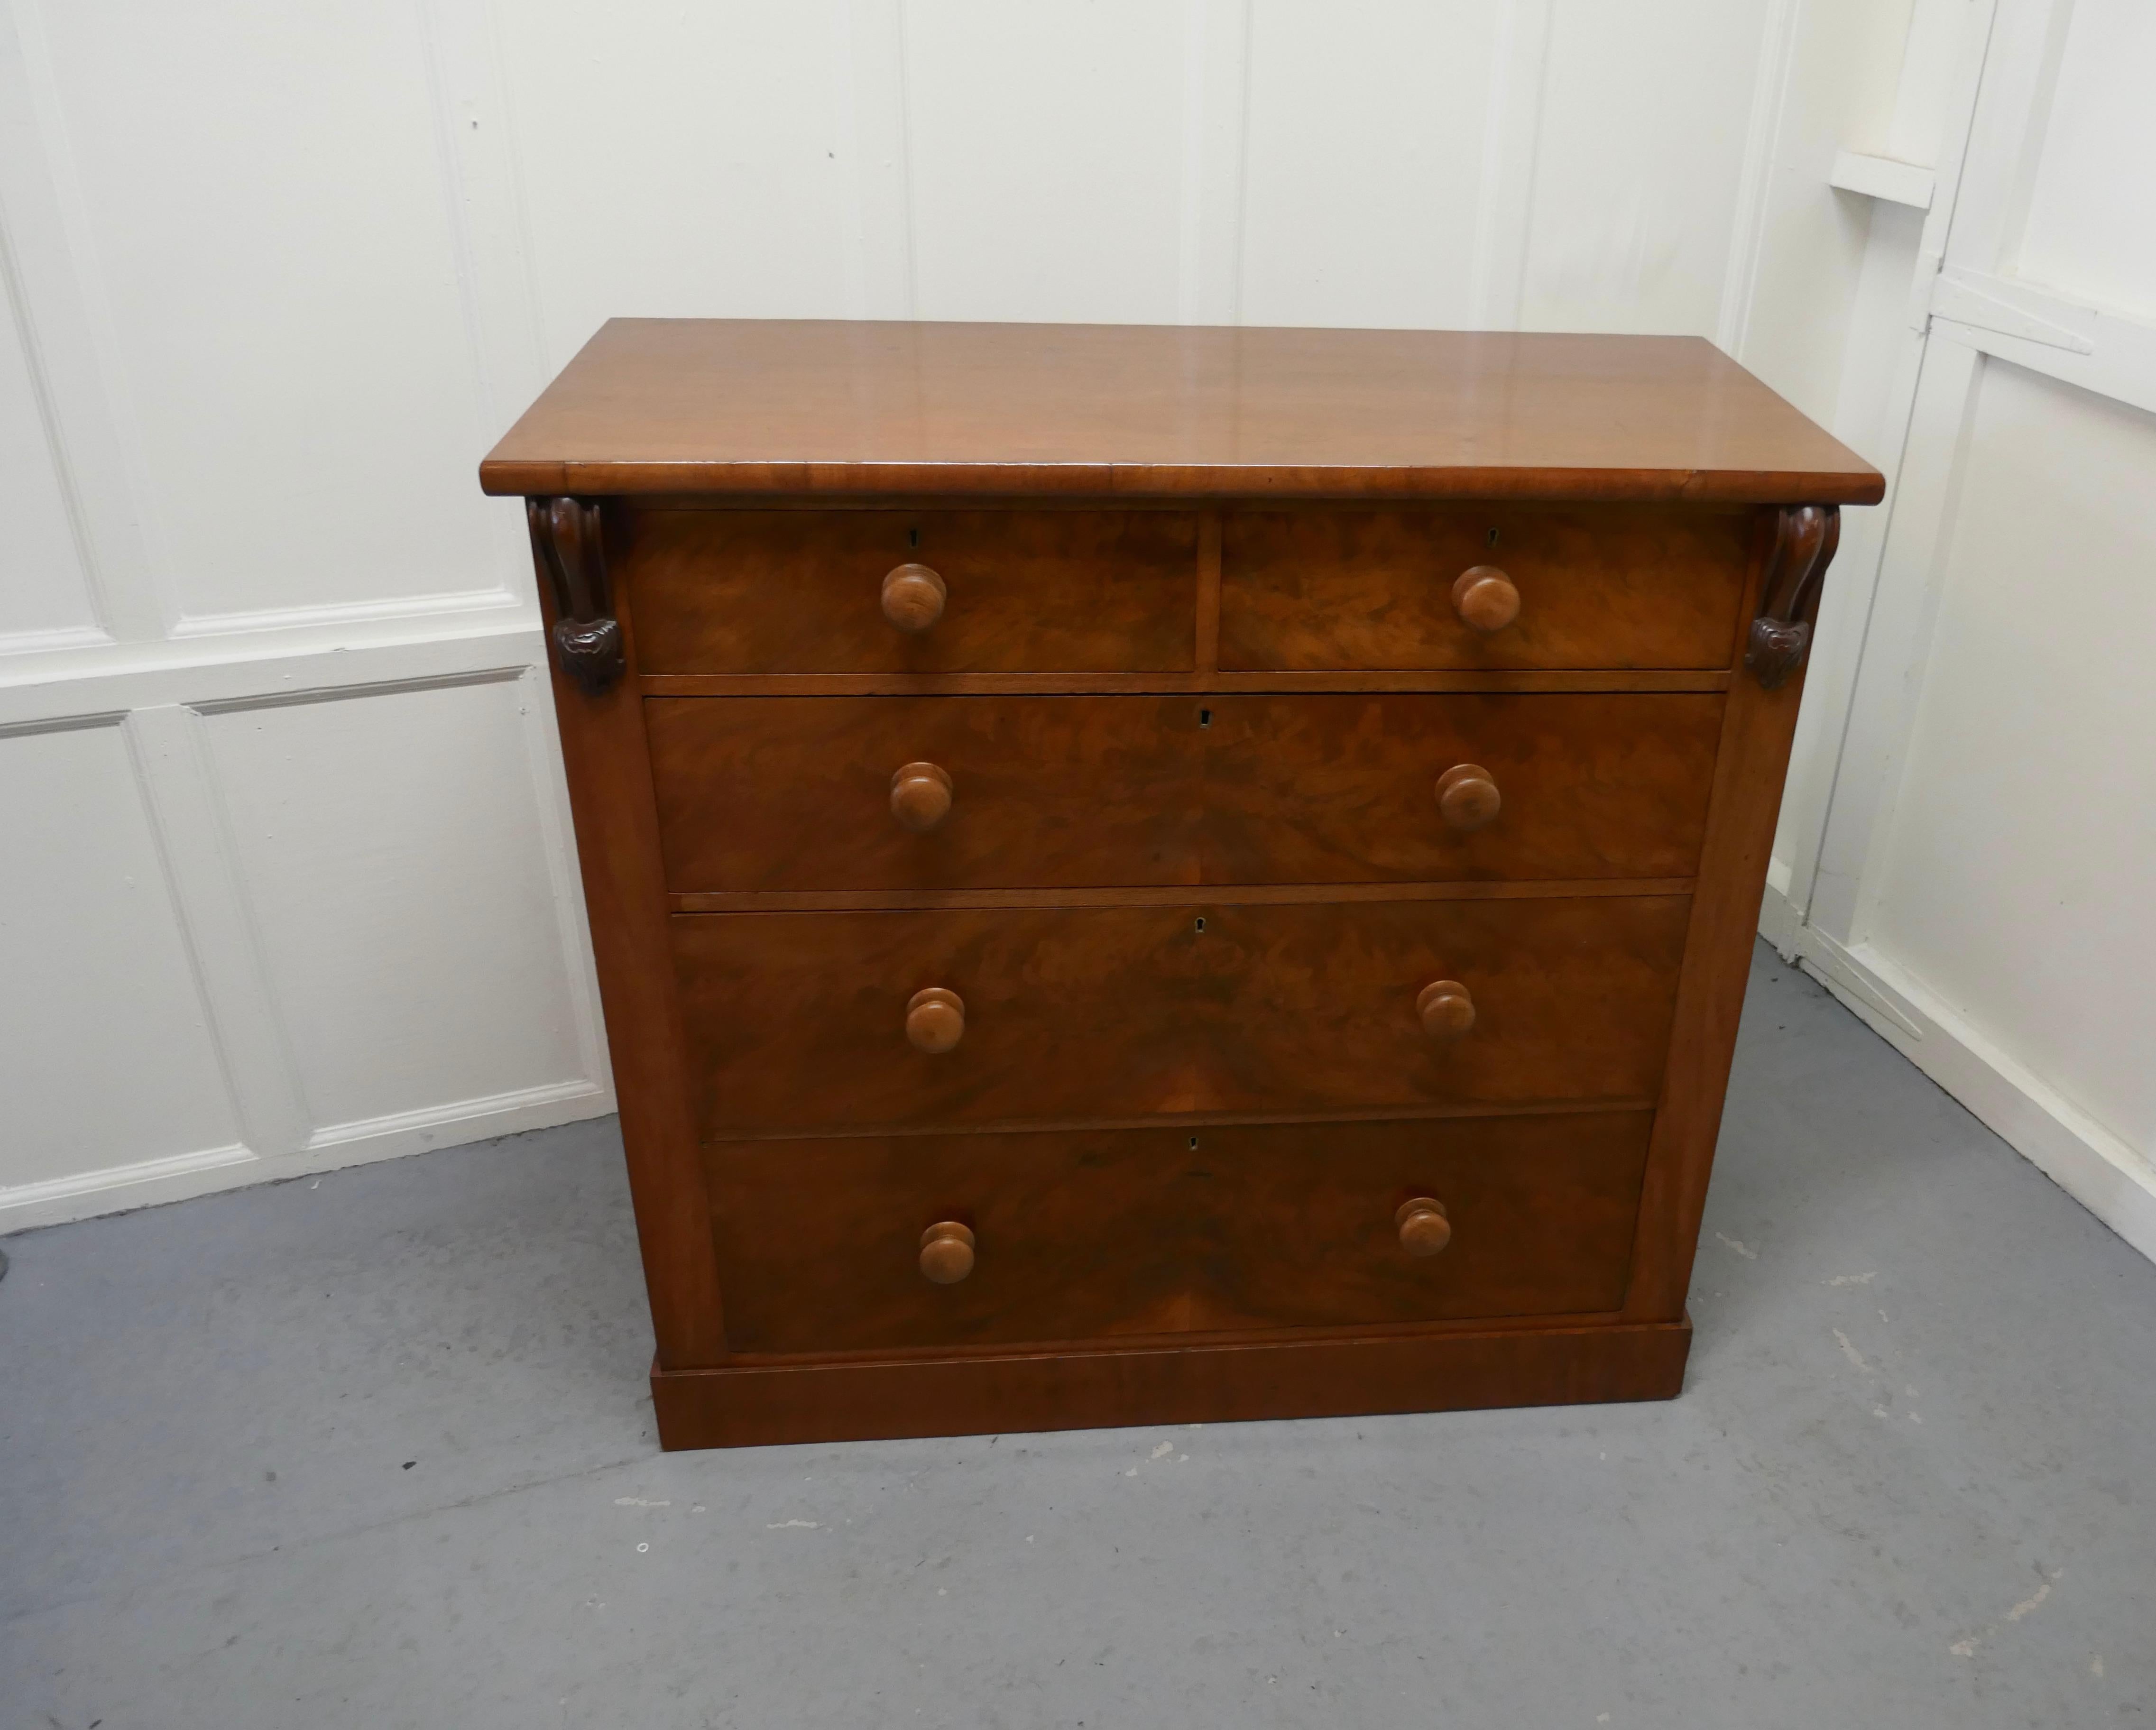 Large Victorian mahogany chest of drawers

Victorian flame mahogany chest of drawers, the chest has 2 carved mahogany corbels on the front, it has 2 short over 3 graduated drawers with turned wooden knobs

The chest is in very good condition, it